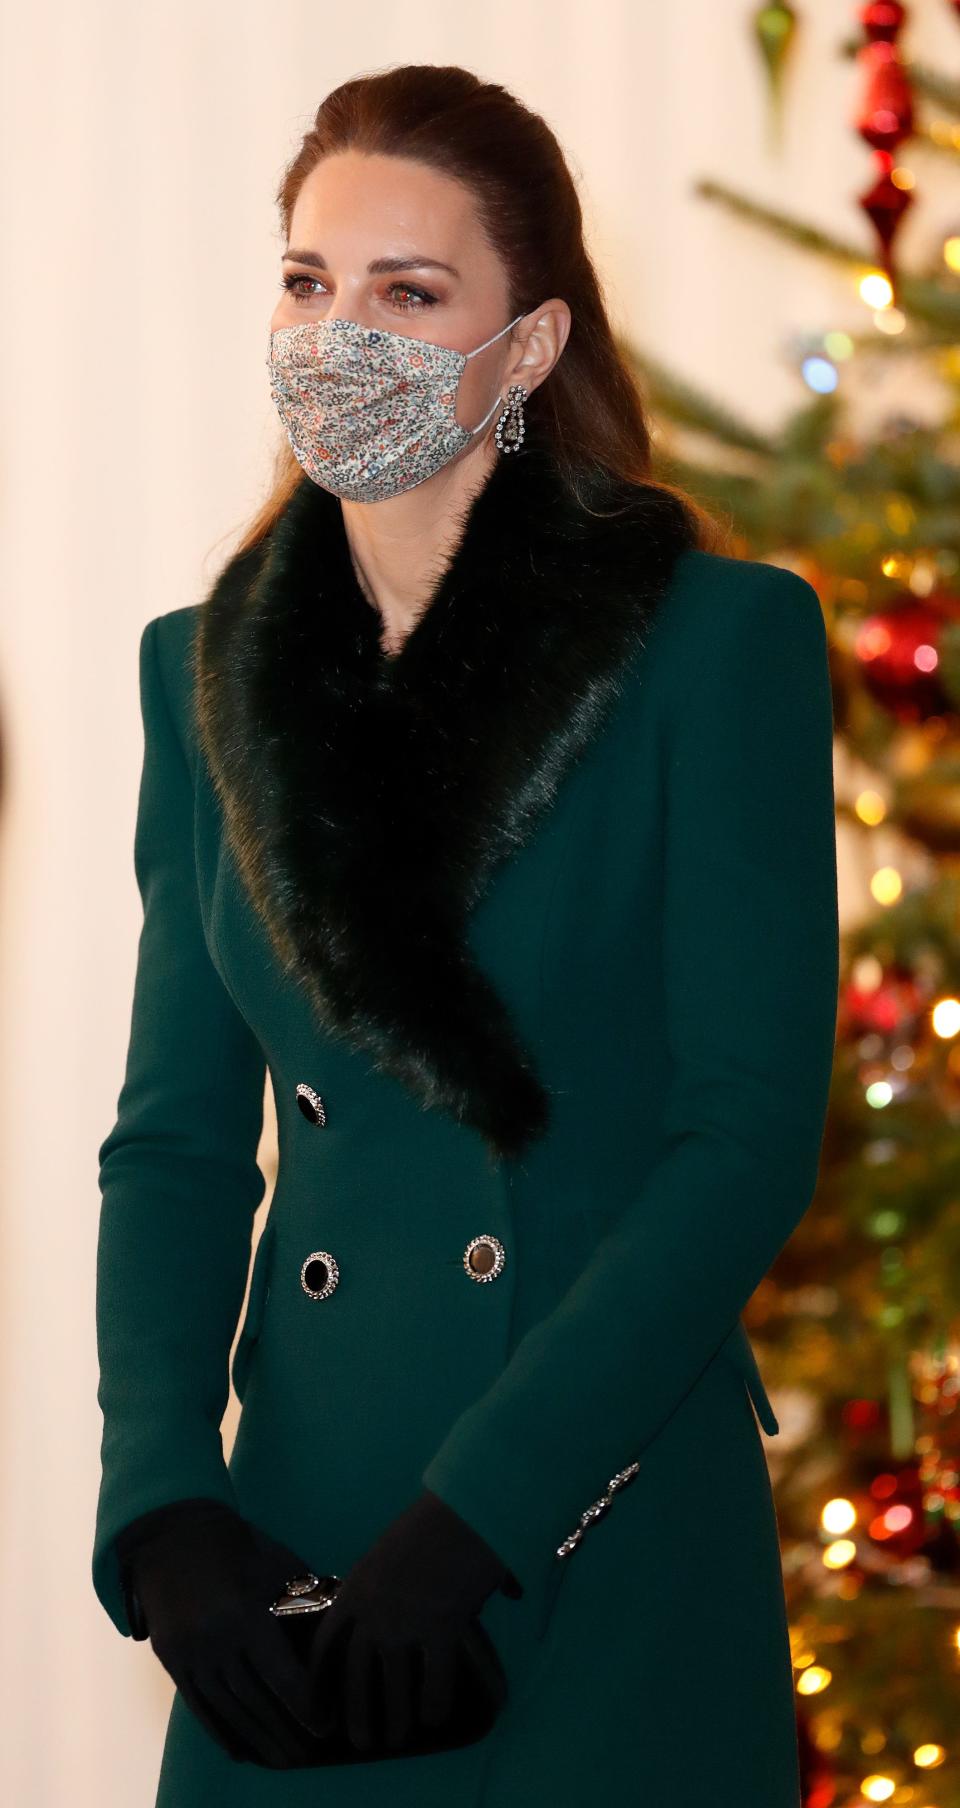 Kate Middleton wears a green coat and face mask in December 2020.